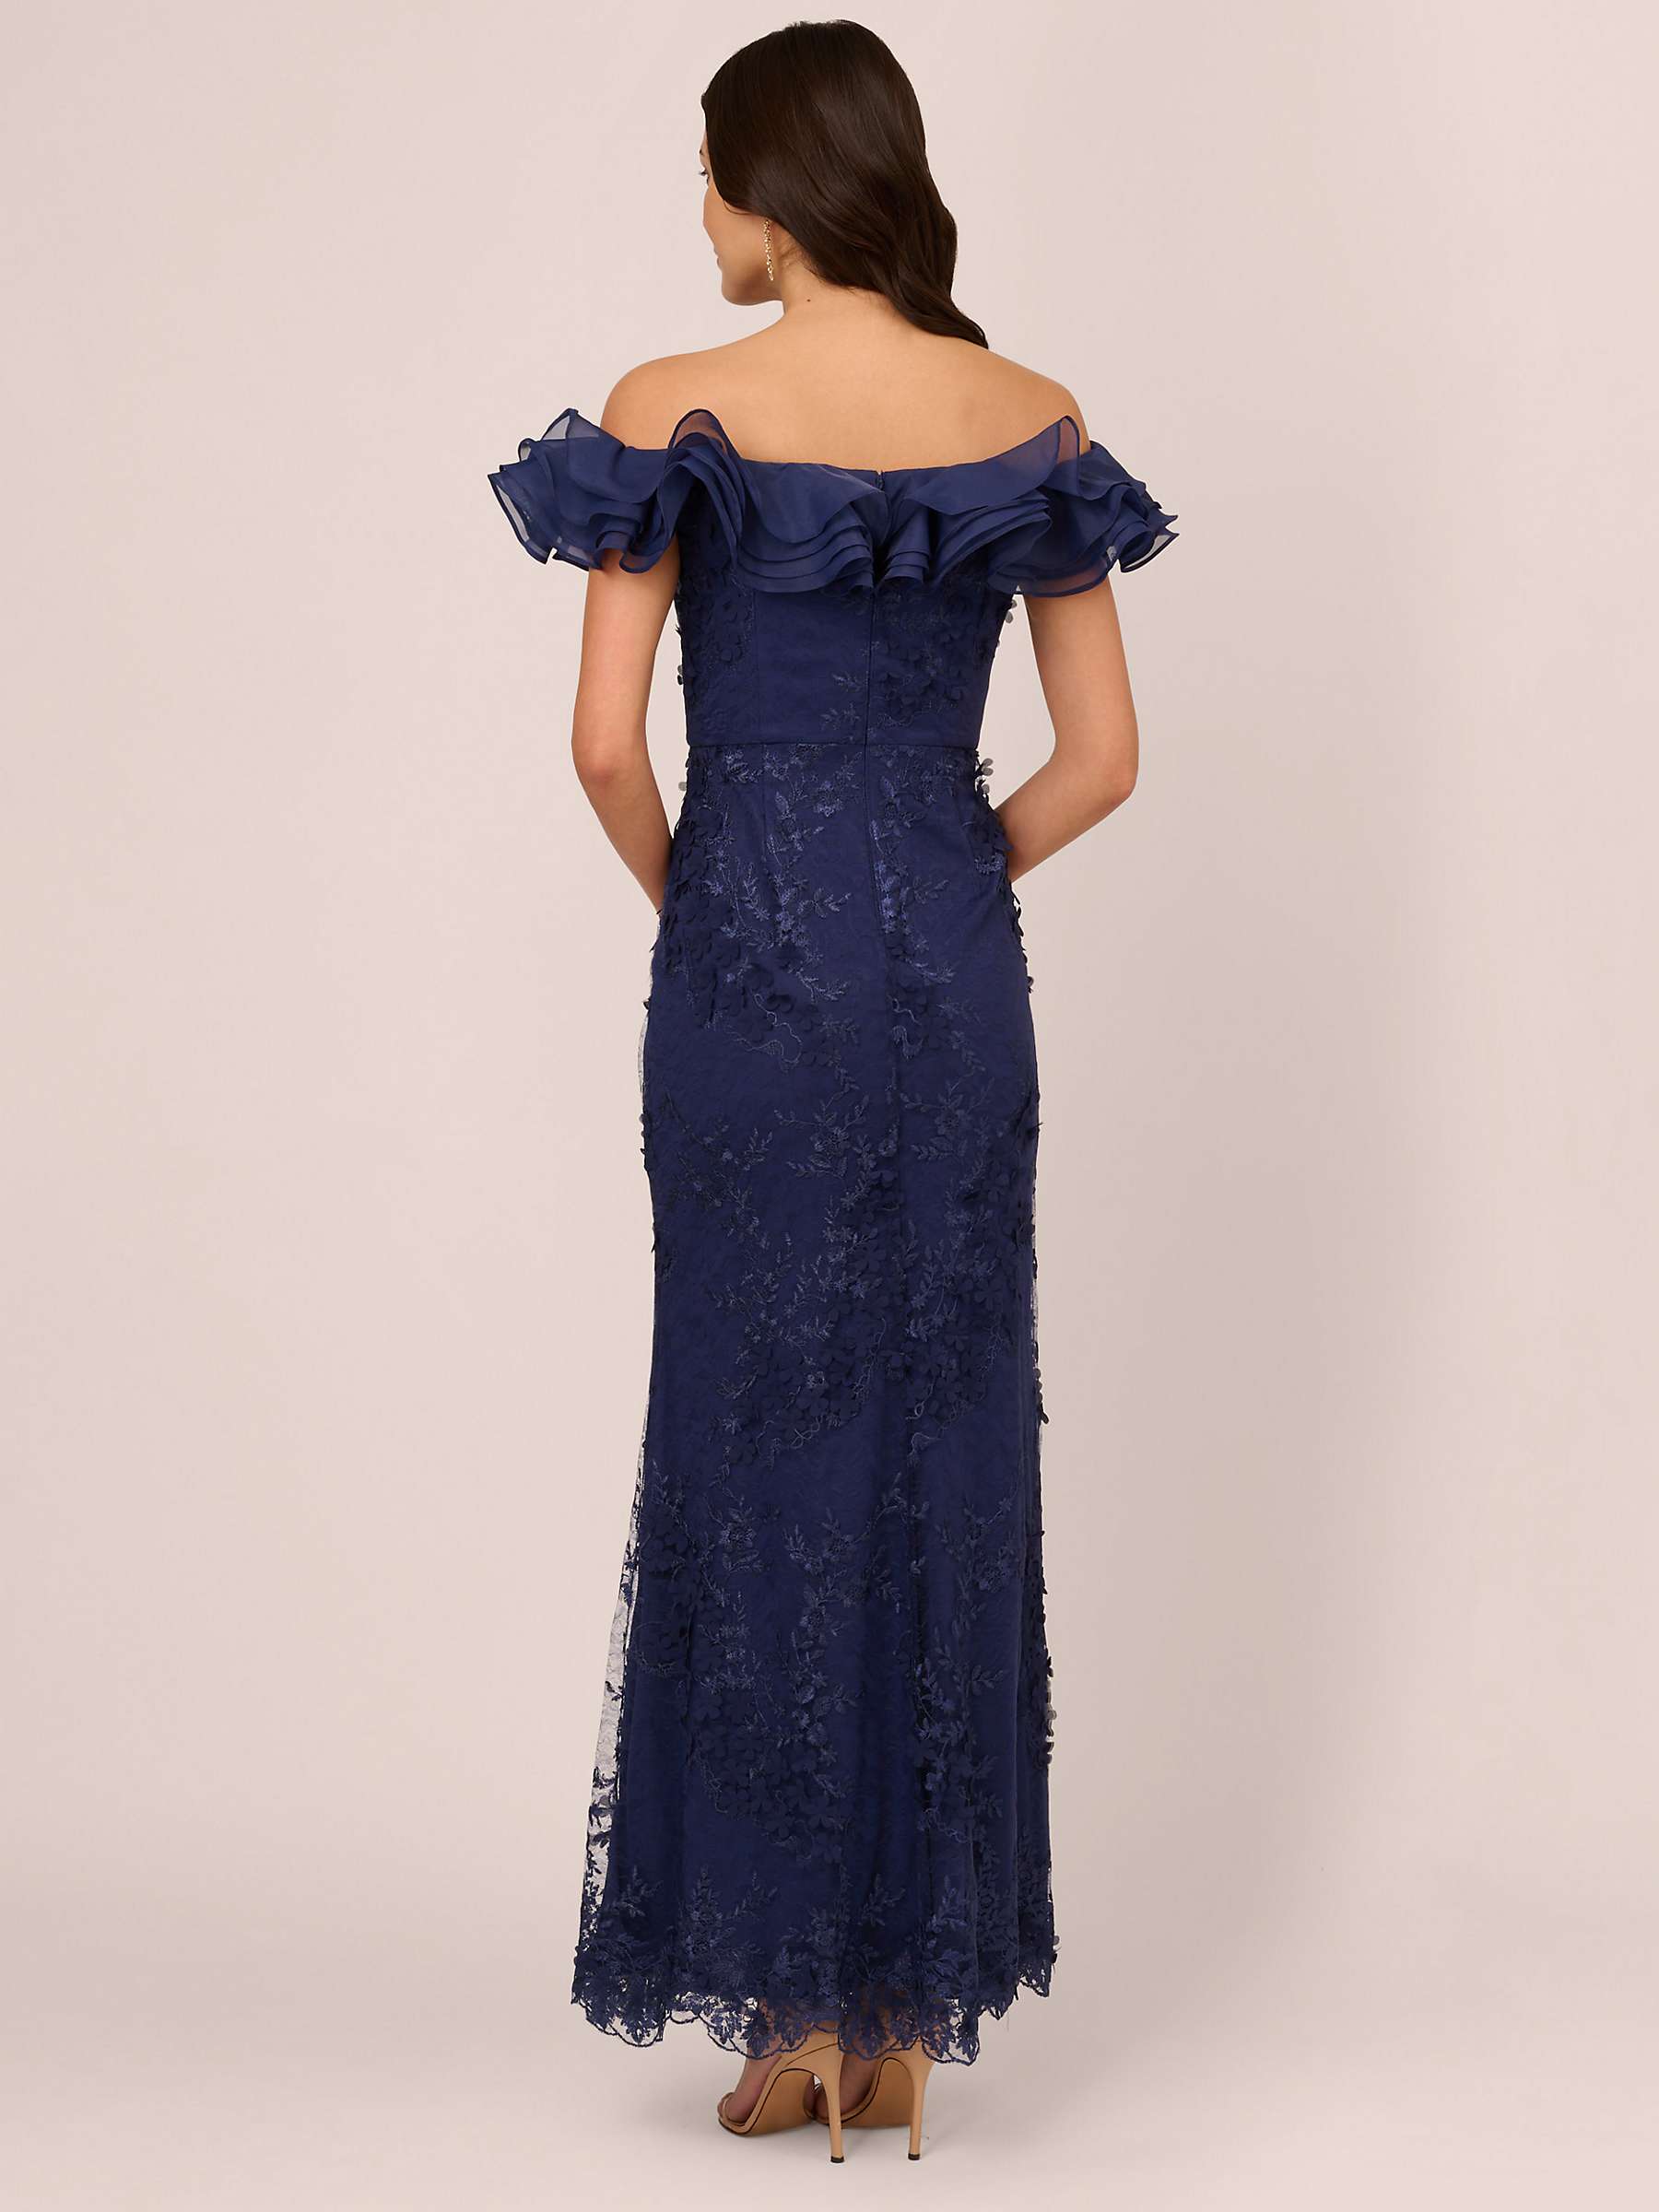 Buy Adrianna Papell Floral Ruffle Maxi Dress, Light Navy Online at johnlewis.com